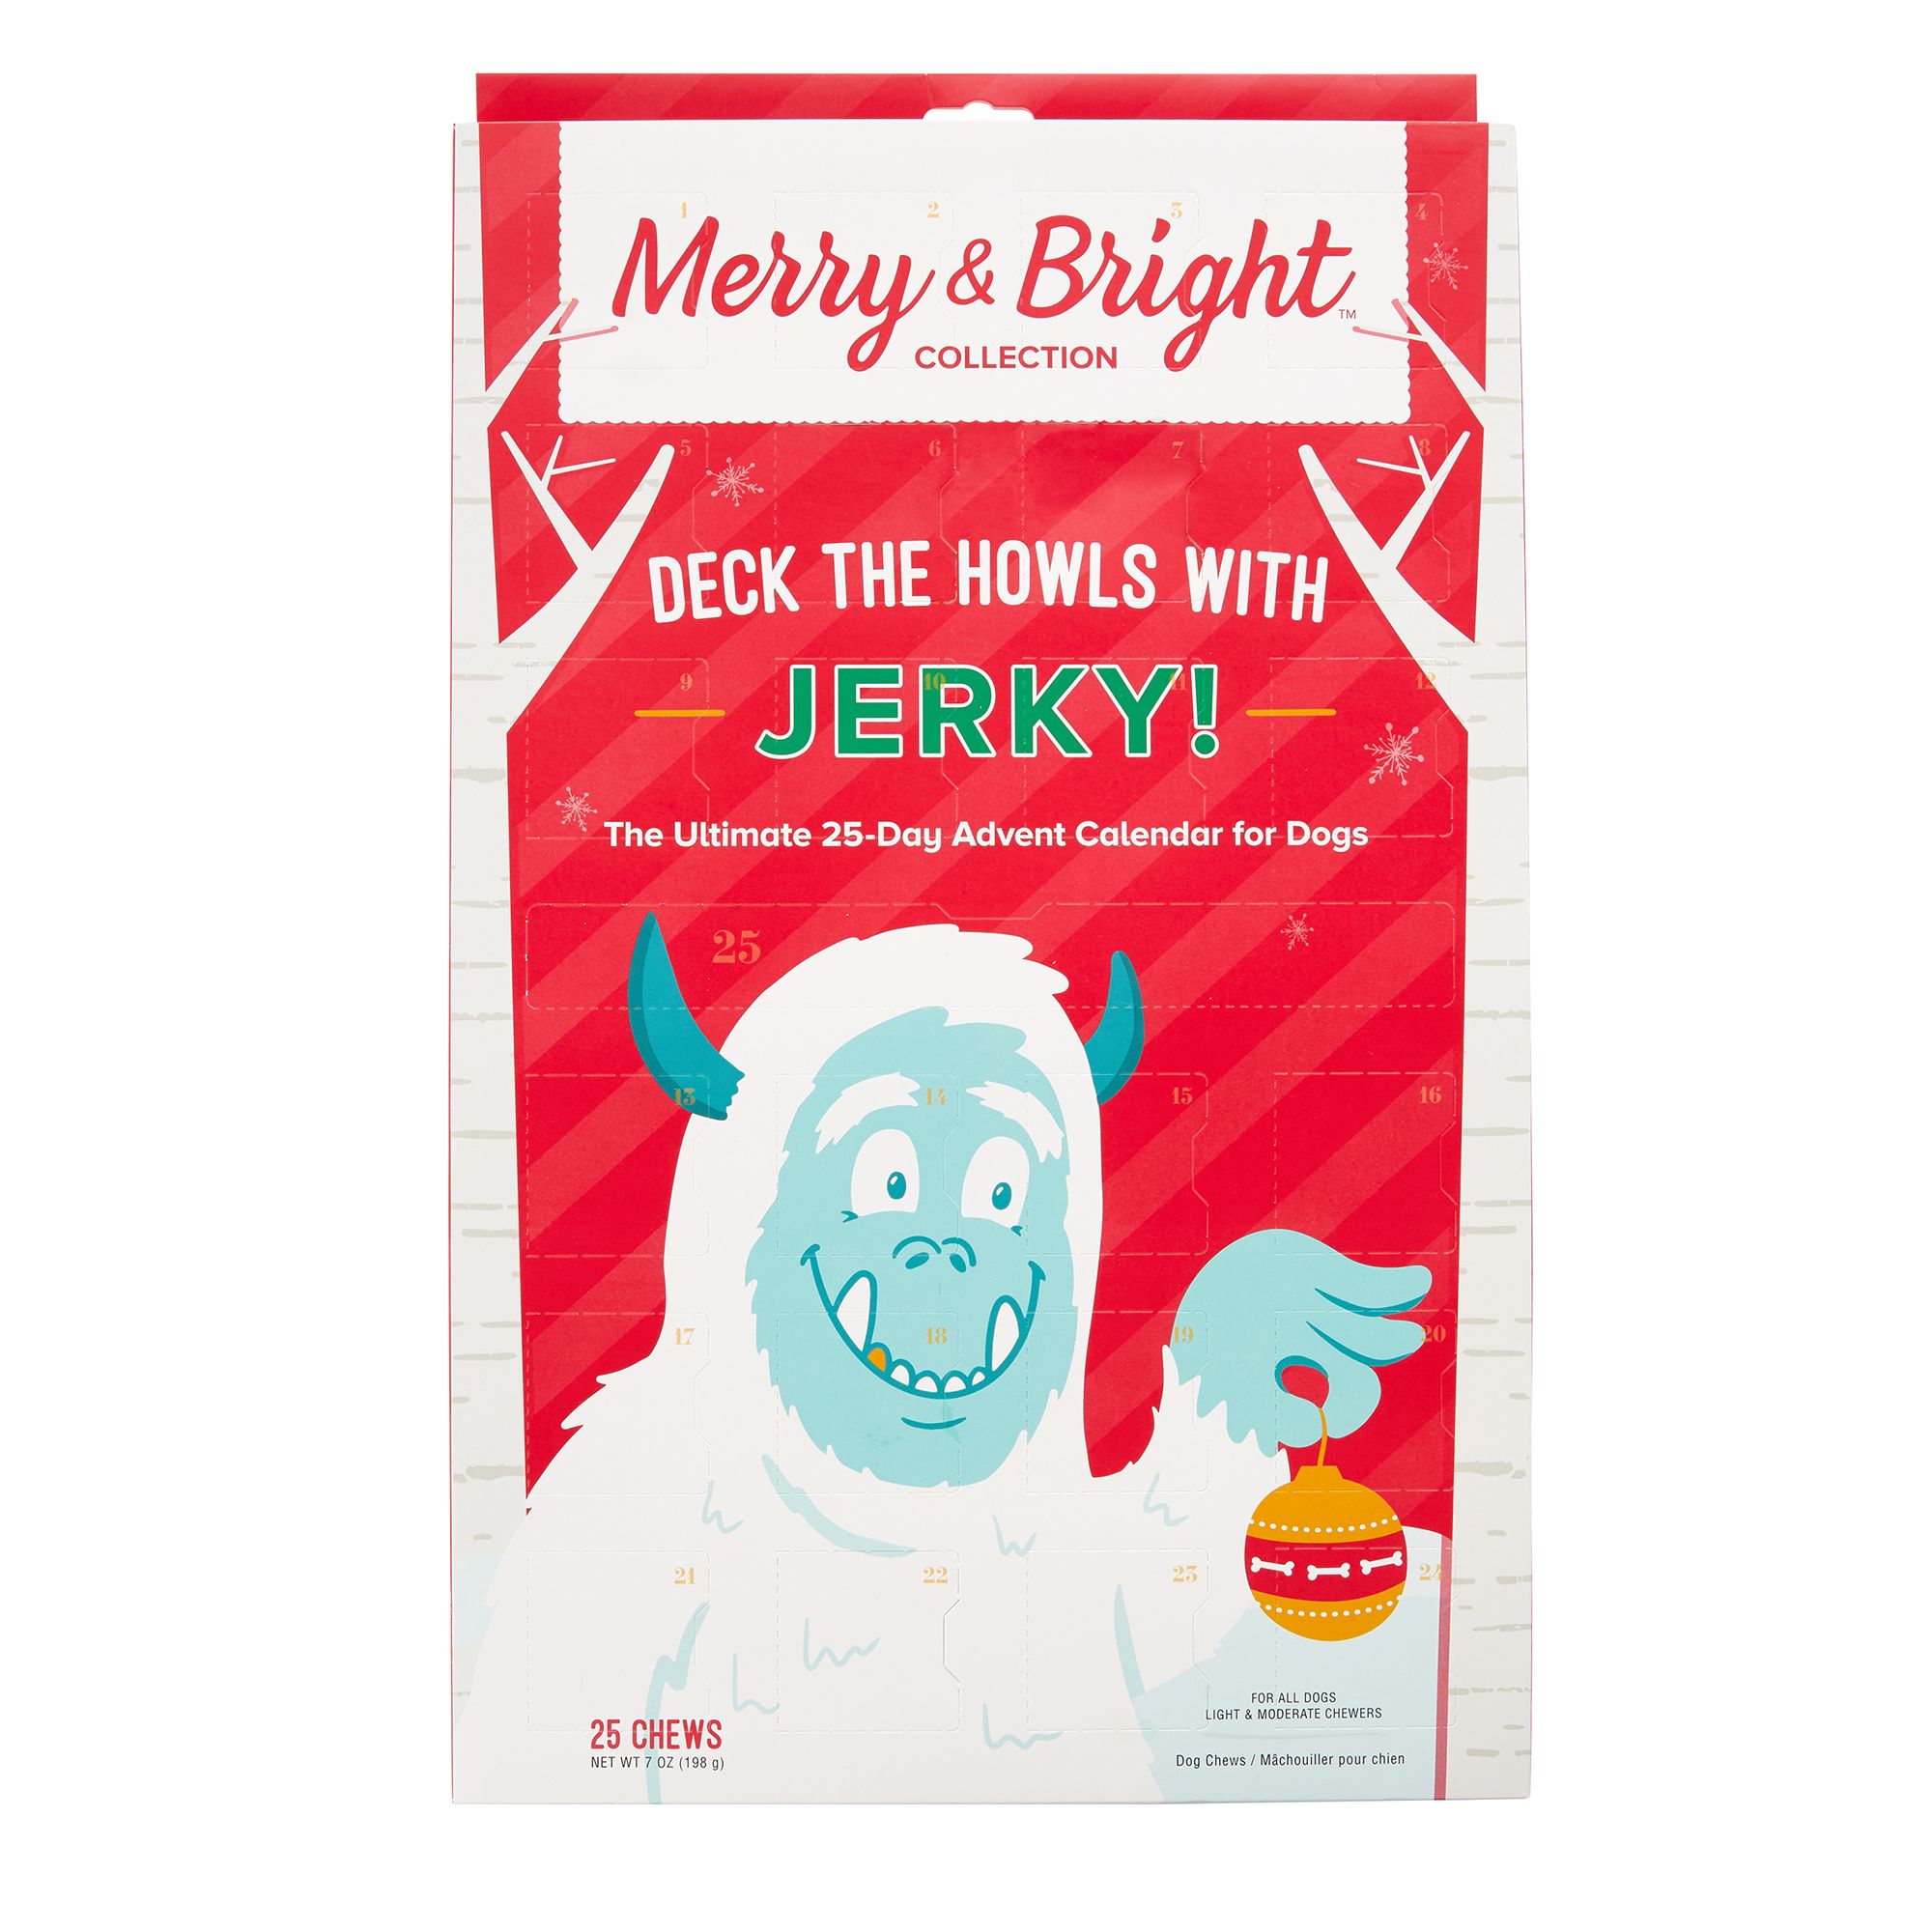 Merry & Bright + Holiday Deck The Howls with Jerky Advent Calendar